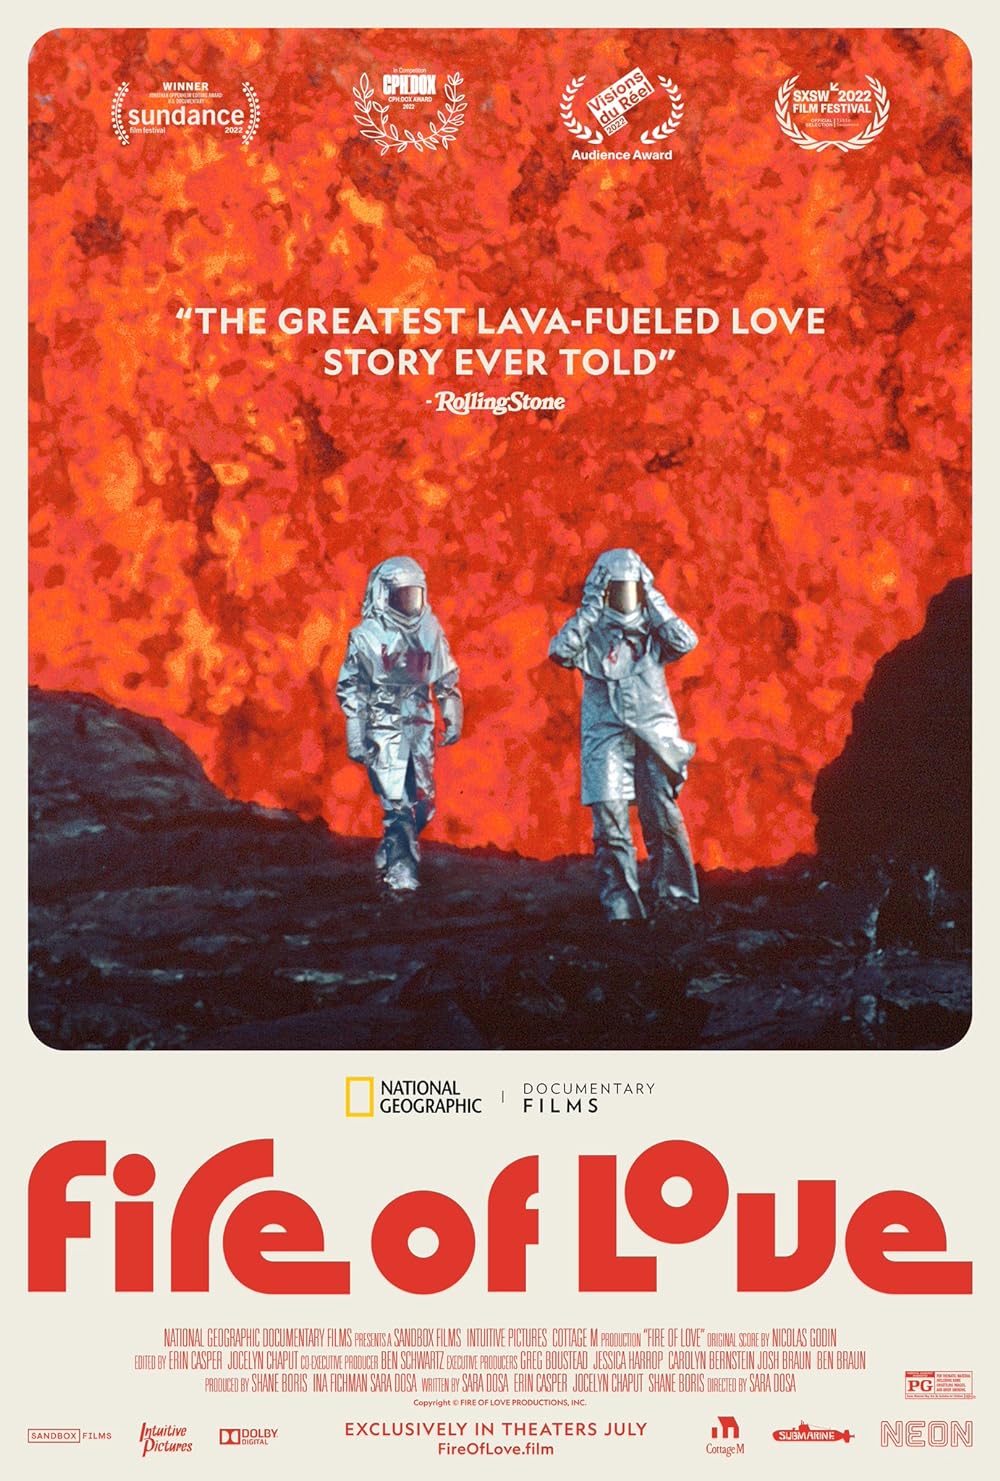 Directed by Sara Dosa, 'Fire of Love' is a documentary that explores the love story of Katia and Maurice Krafft, French volcanologists who met on a blind date and shared a passion for exploring erupting volcanoes. Combining archival footage and captivating imagery, the film provides a fascinating exploration of love amidst the fiery landscapes of nature.